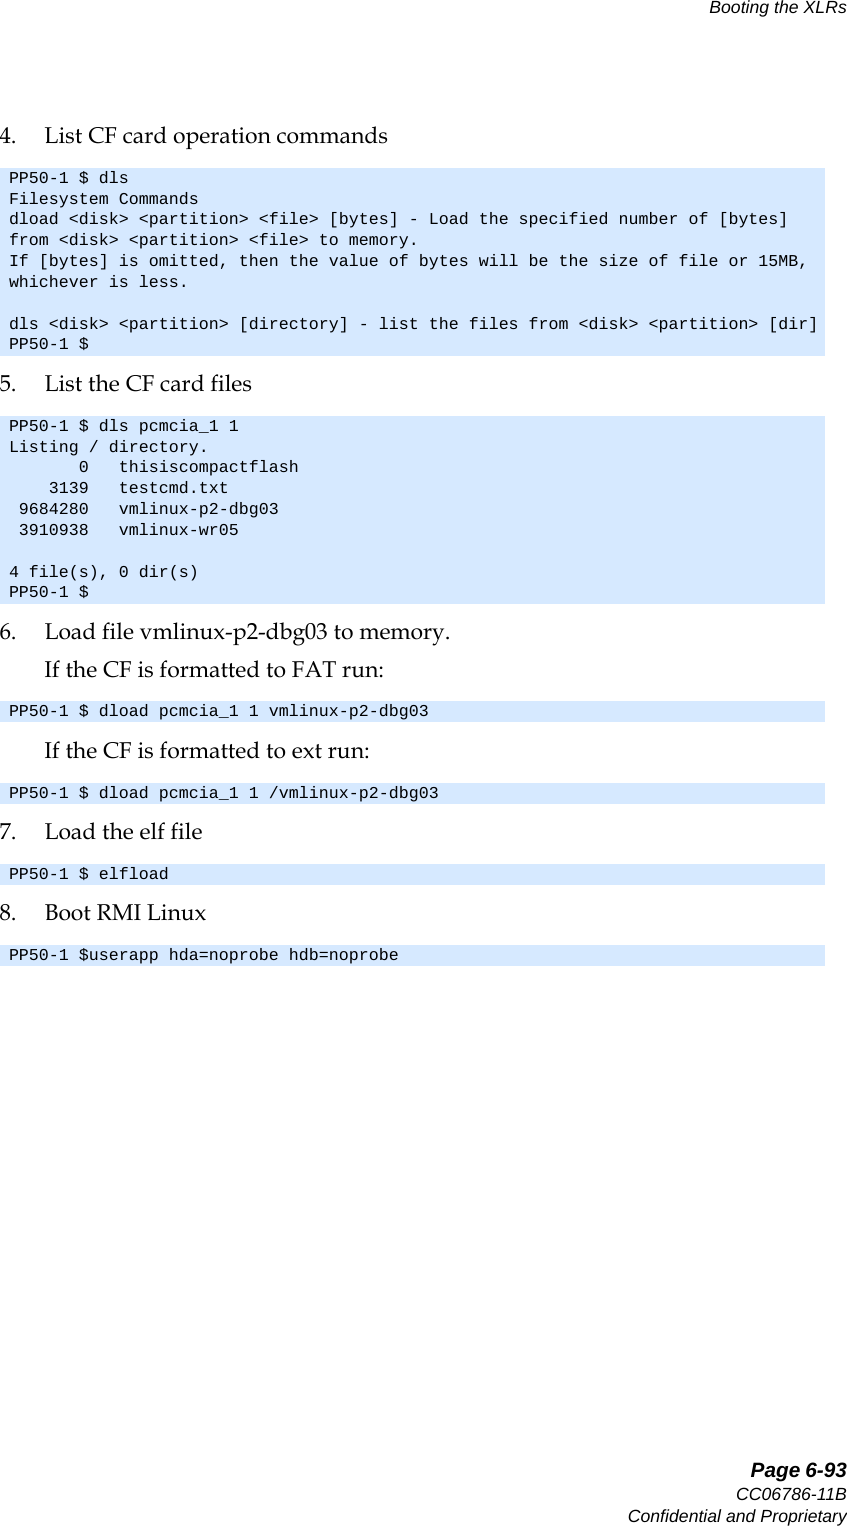   Page 6-93CC06786-11BConfidential and ProprietaryBooting the XLRs14ABABPreliminary4. List CF card operation commands5. List the CF card files6. Load file vmlinux-p2-dbg03 to memory. If the CF is formatted to FAT run: If the CF is formatted to ext run: 7. Load the elf file8. Boot RMI LinuxPP50-1 $ dlsFilesystem Commandsdload &lt;disk&gt; &lt;partition&gt; &lt;file&gt; [bytes] - Load the specified number of [bytes] from &lt;disk&gt; &lt;partition&gt; &lt;file&gt; to memory. If [bytes] is omitted, then the value of bytes will be the size of file or 15MB, whichever is less.dls &lt;disk&gt; &lt;partition&gt; [directory] - list the files from &lt;disk&gt; &lt;partition&gt; [dir]PP50-1 $PP50-1 $ dls pcmcia_1 1Listing / directory.       0   thisiscompactflash     3139   testcmd.txt  9684280   vmlinux-p2-dbg03  3910938   vmlinux-wr054 file(s), 0 dir(s)PP50-1 $PP50-1 $ dload pcmcia_1 1 vmlinux-p2-dbg03PP50-1 $ dload pcmcia_1 1 /vmlinux-p2-dbg03PP50-1 $ elfloadPP50-1 $userapp hda=noprobe hdb=noprobe